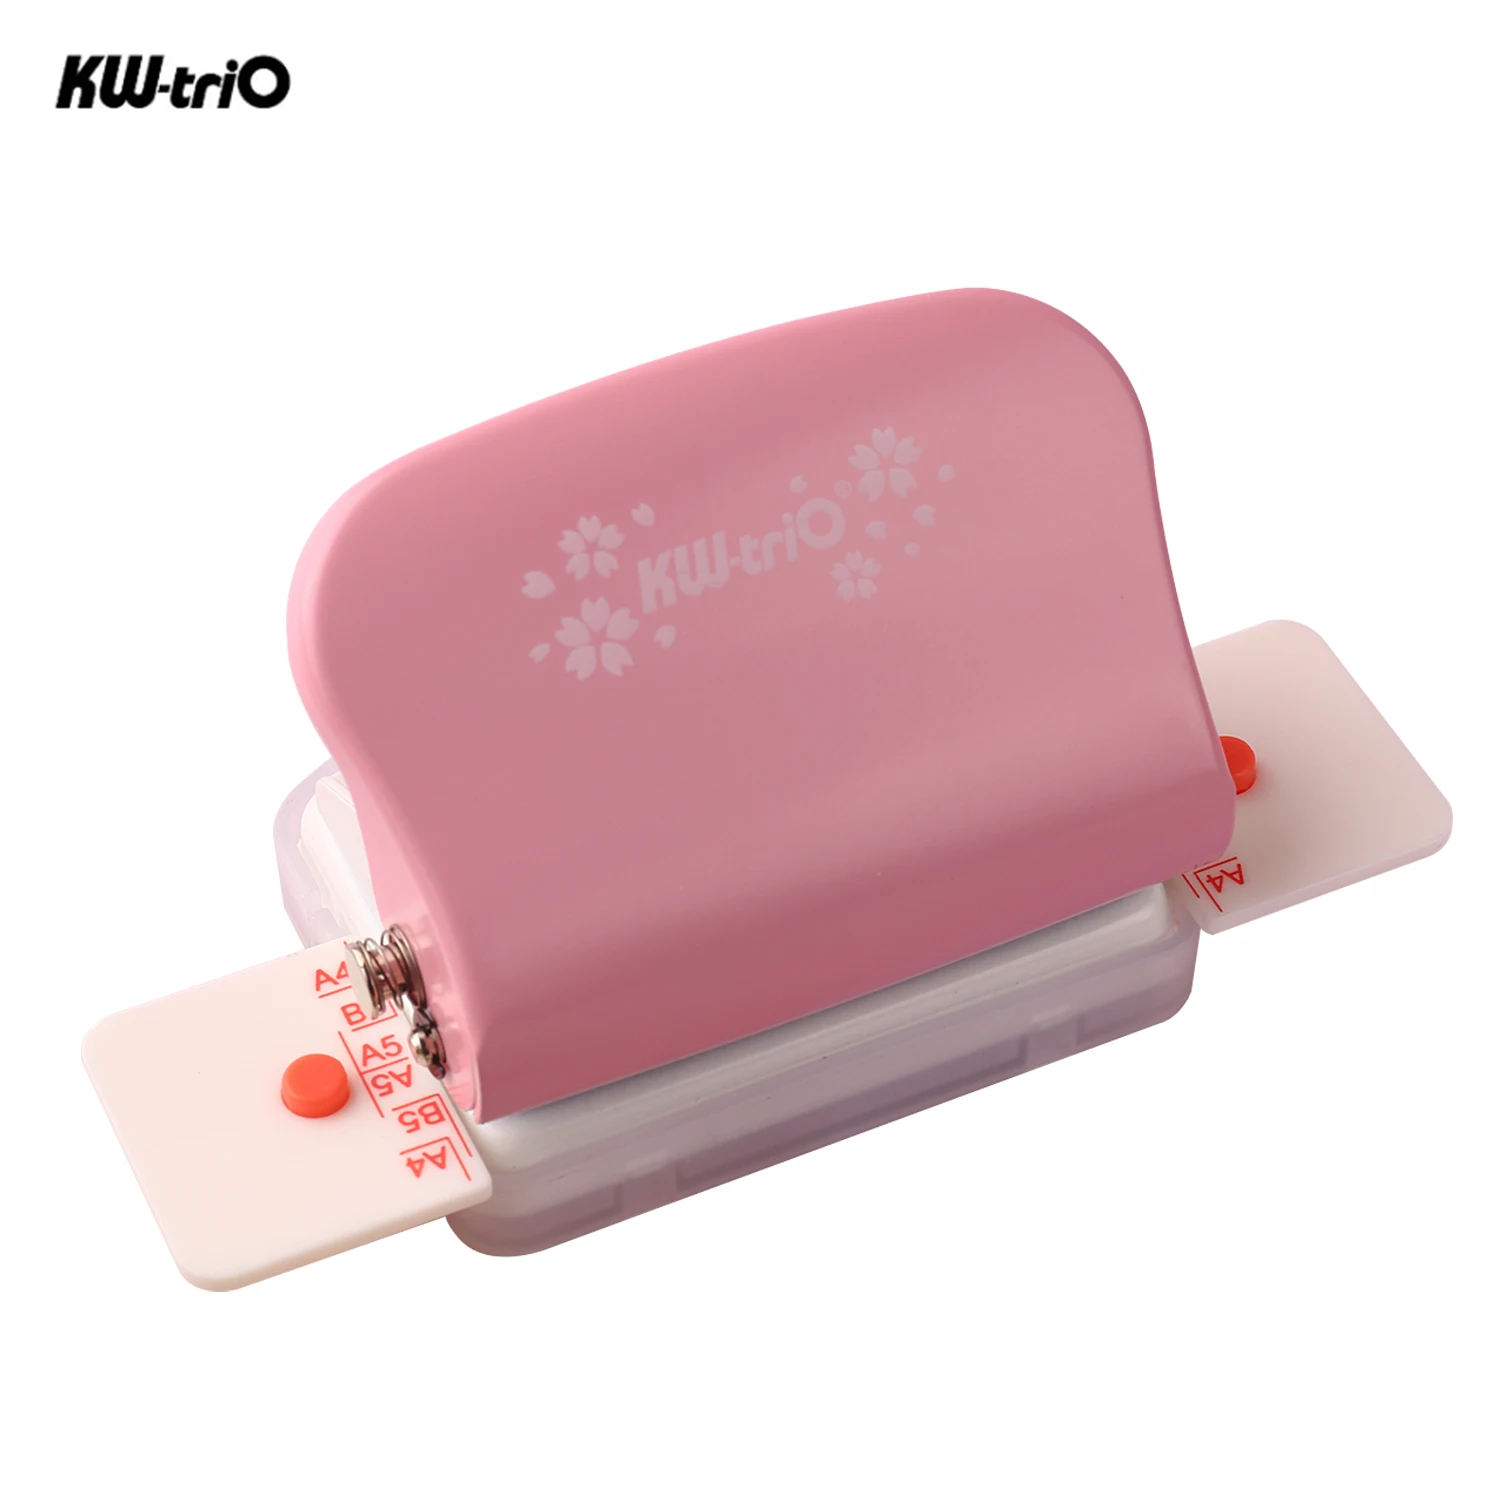 

KW-trio 6-Hole Paper Punch Handheld Metal Hole Puncher 5 Sheet Capacity 6mm for A4 A5 B5 Notebook Scrapbook Diary Planner